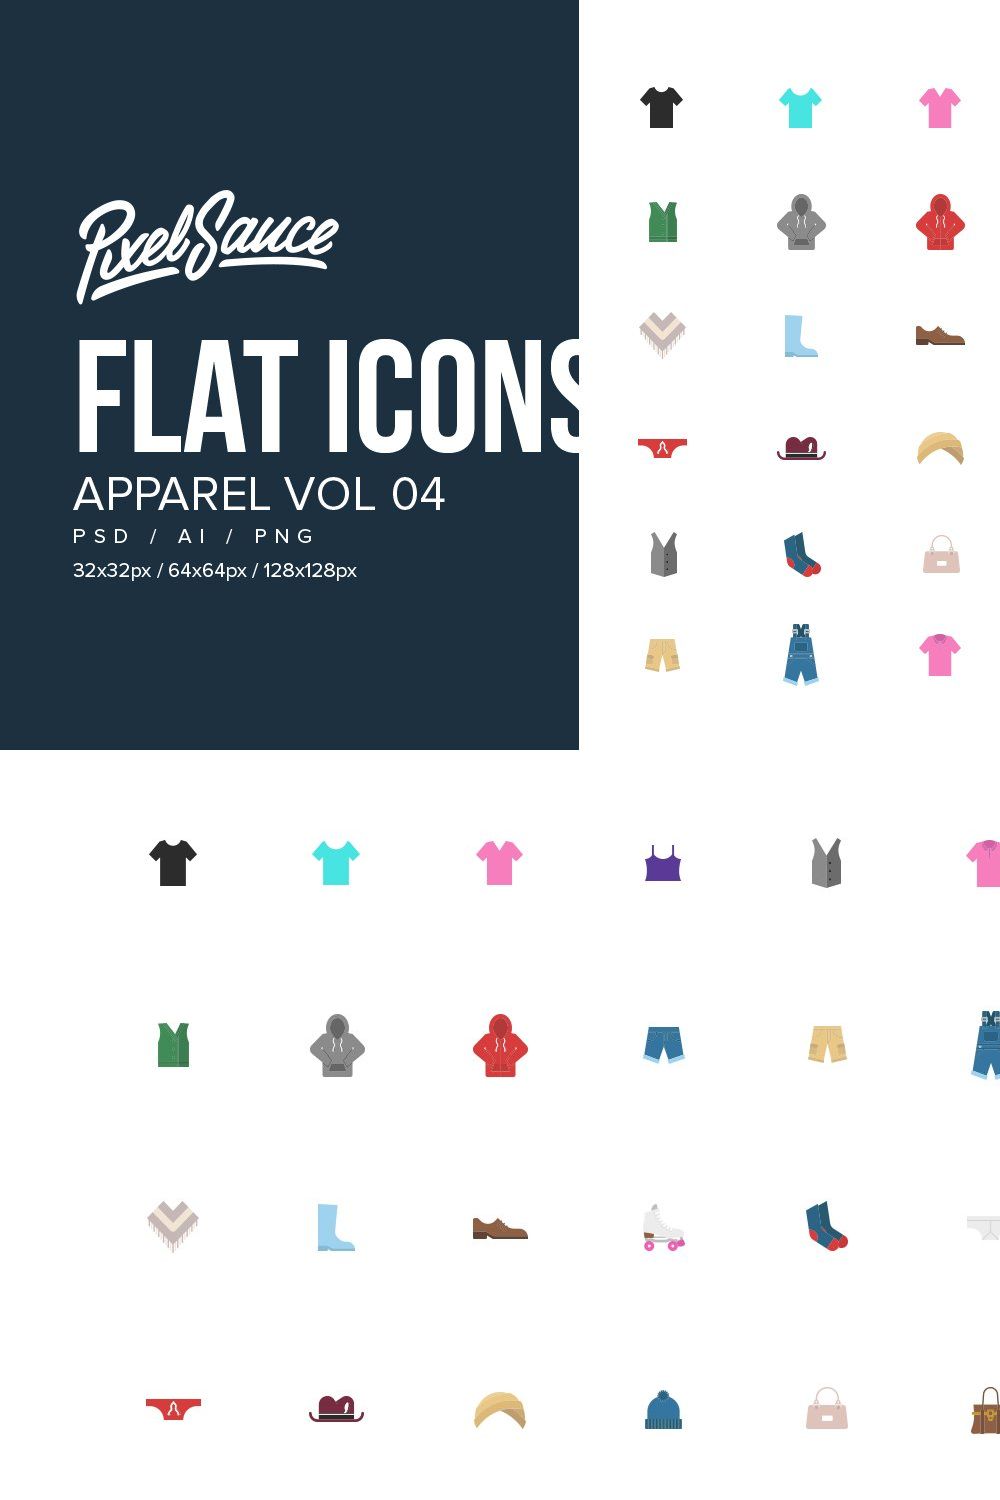 Clothes & Apparel Flat Icons Vol 04 pinterest preview image.